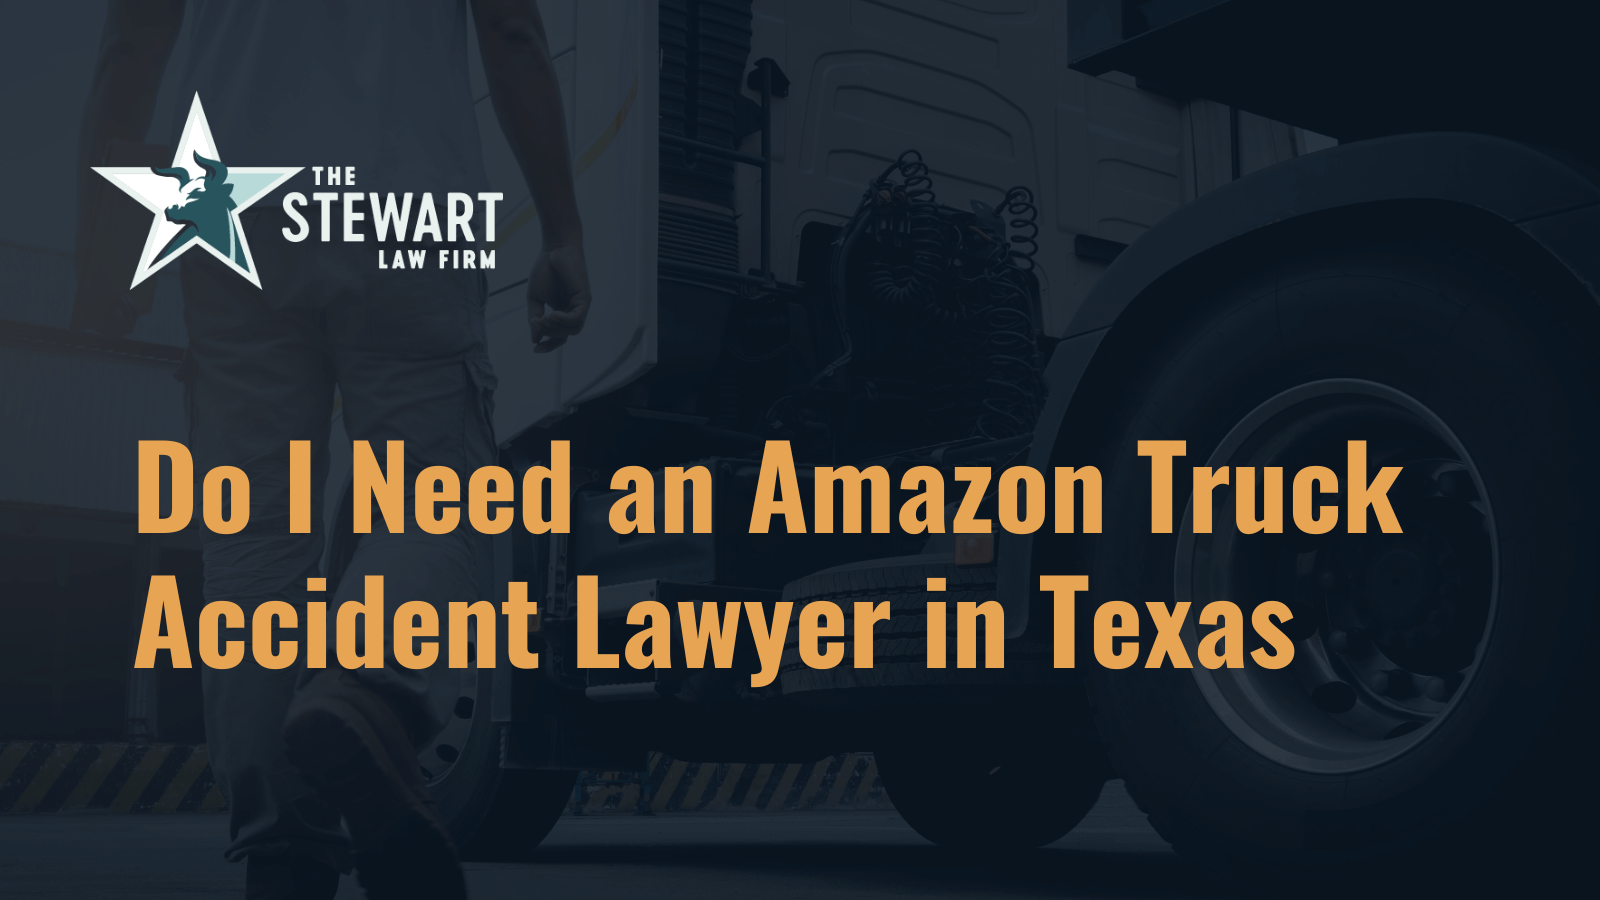 Do I Need an Amazon Truck Accident Lawyer in Texas